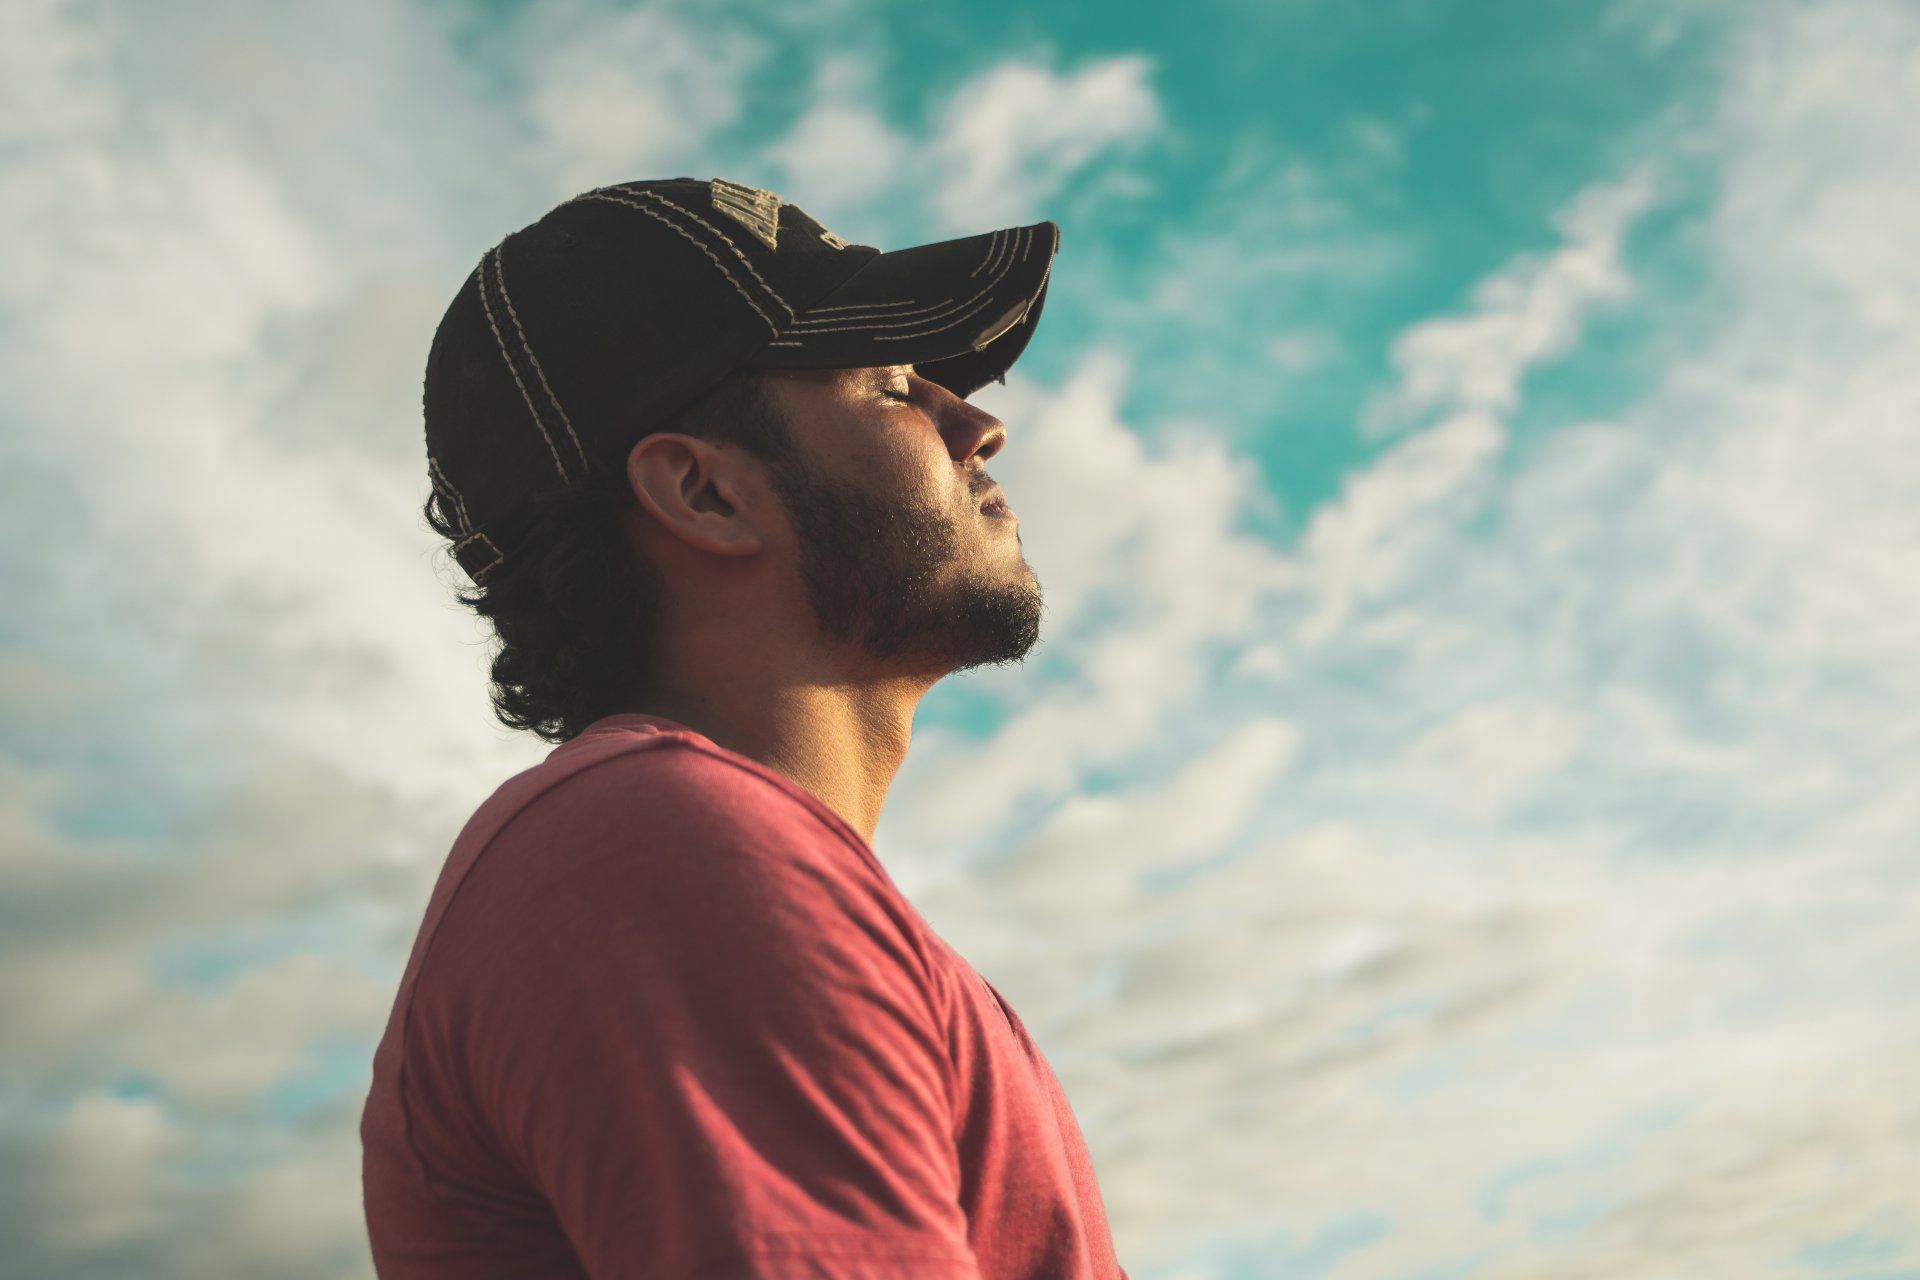 A man wearing a baseball cap and a red shirt is looking up at the sky.